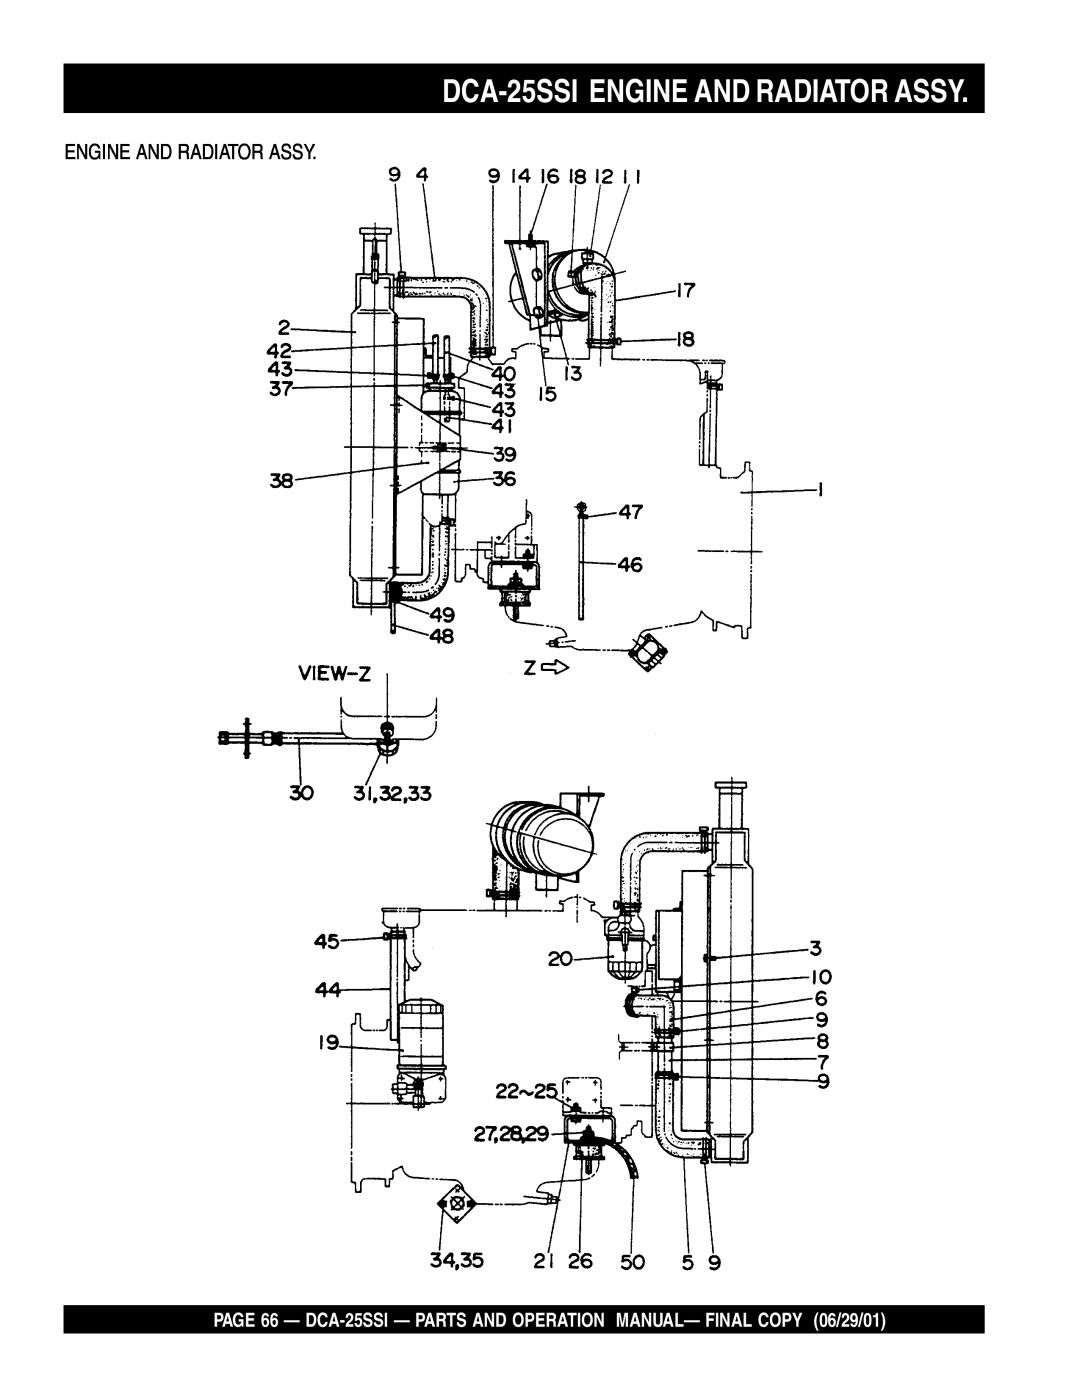 Multiquip operation manual DCA-25SSIENGINE AND RADIATOR ASSY 